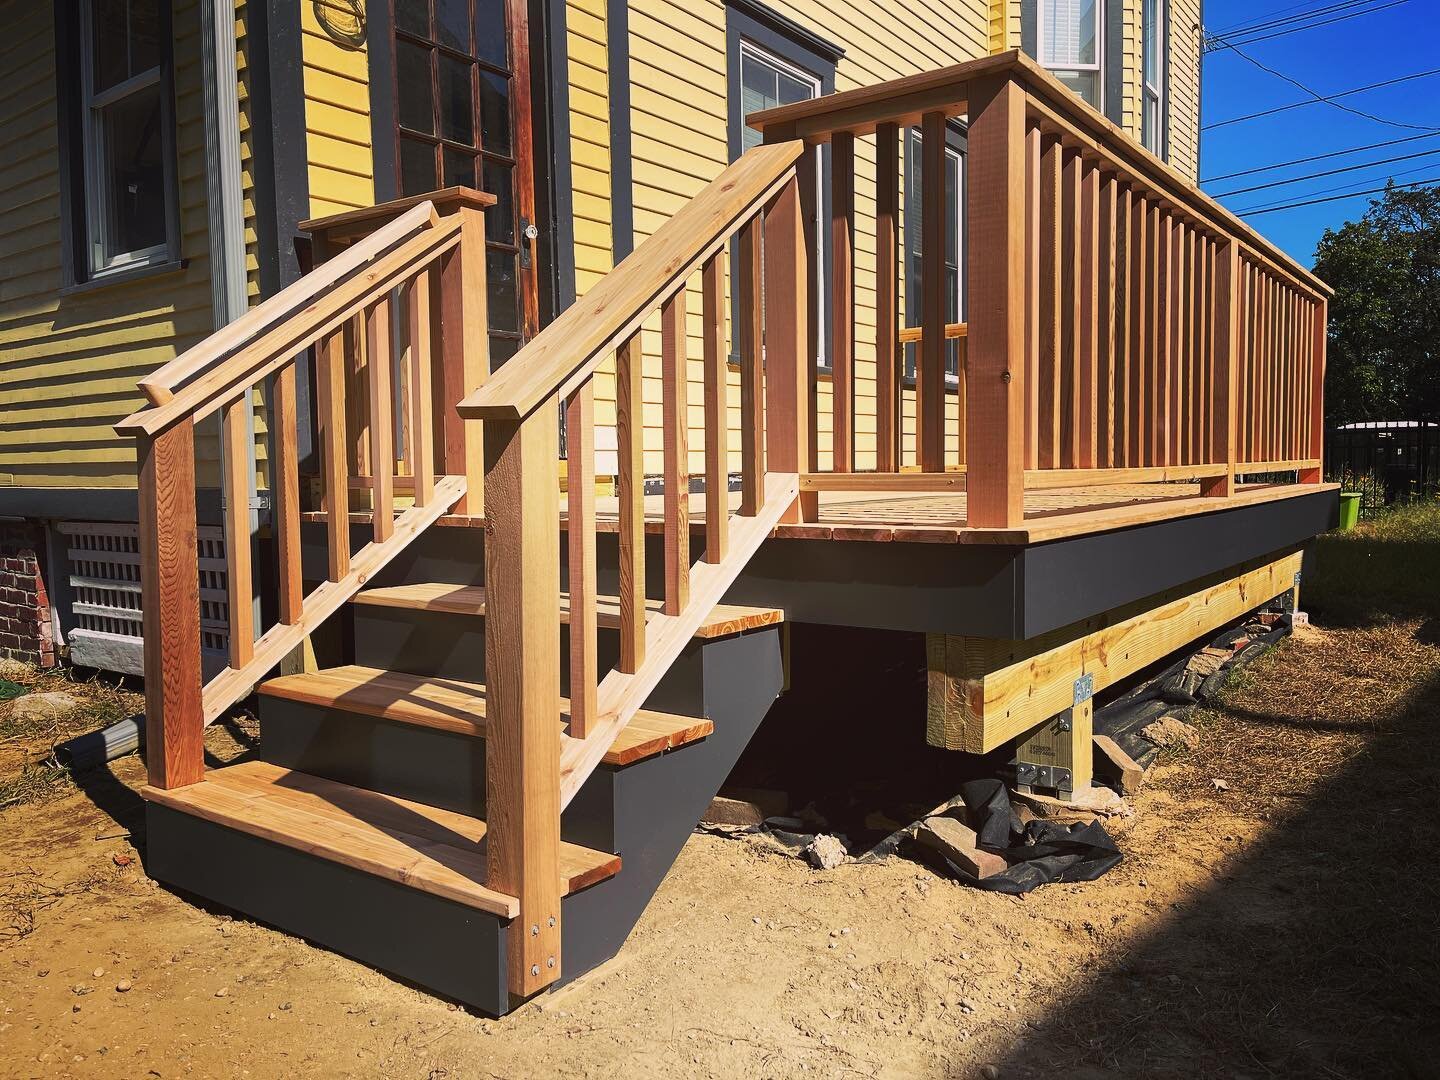 It was Nevin&rsquo;s last day today. He crushed it as usual. I gave him a trim router and some scraps of cedar 2x4 and told him to design, build, and install 1 graspable handrail to finish this deck, which of course he did perfectly.